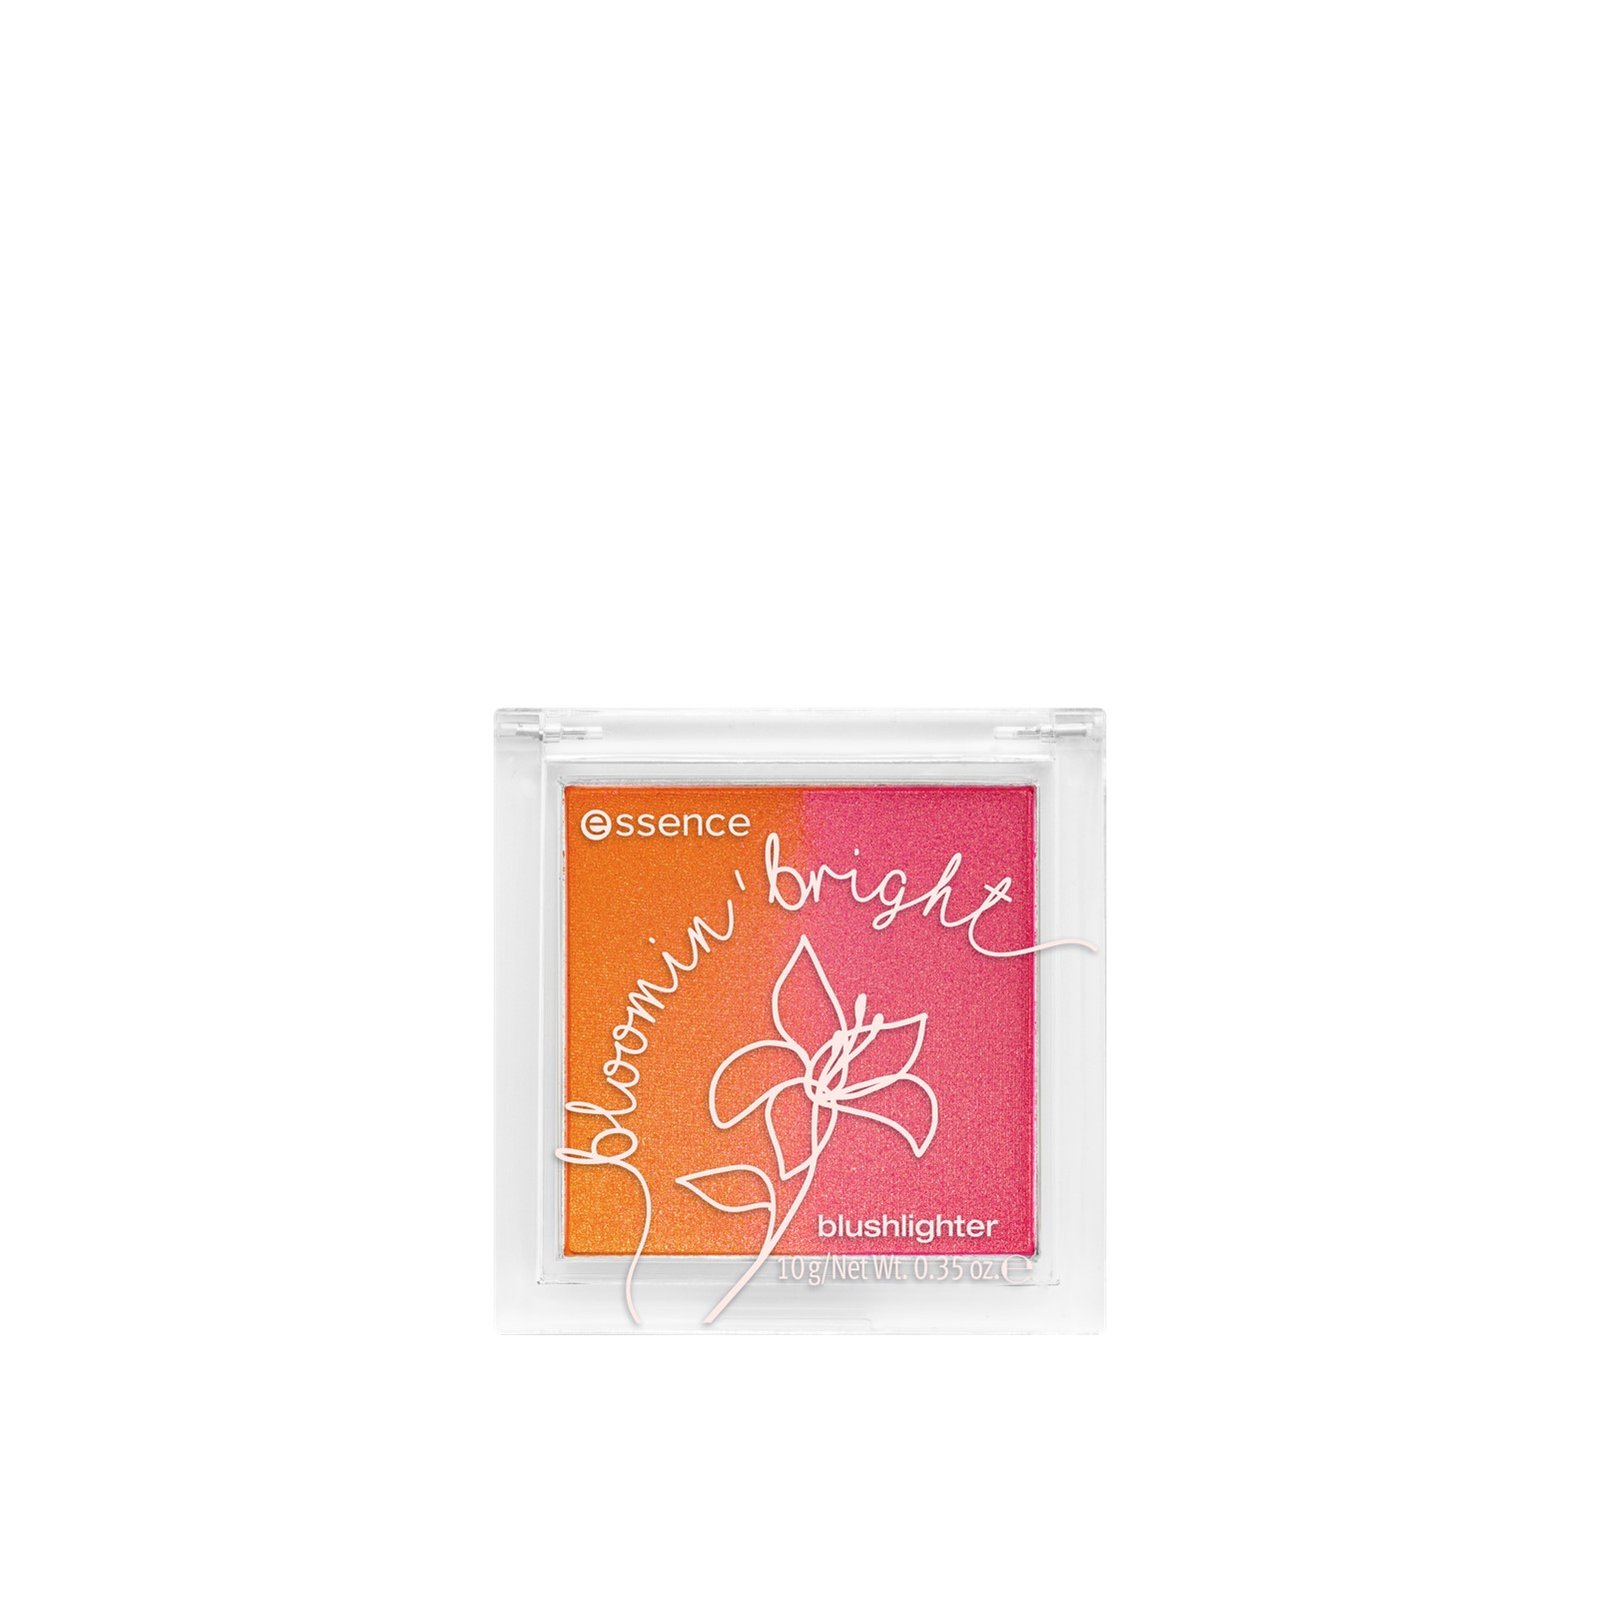 essence Bloomin' Bright Blushlighter 01 Bloom With Me! 10g (0.35oz)